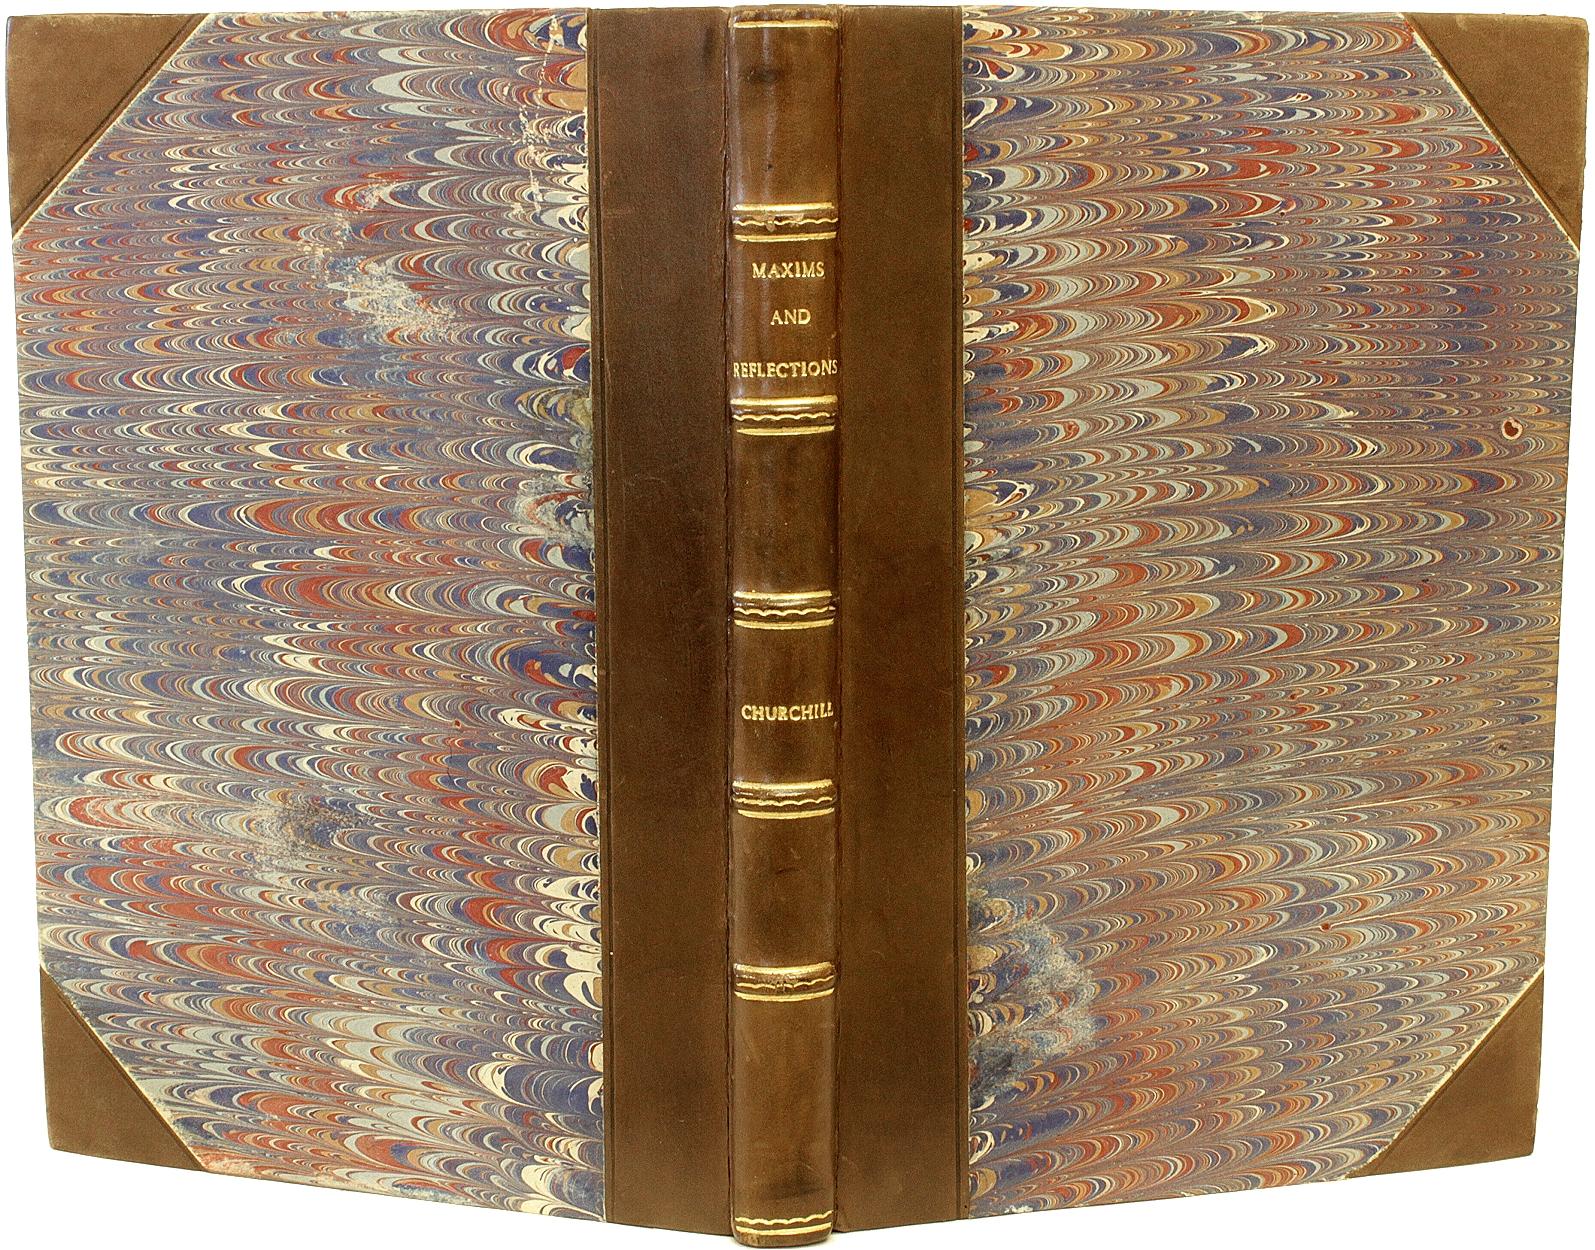 British Winston Churchill, Maxims and Reflections, First Edition - 1947 - Leather Bound